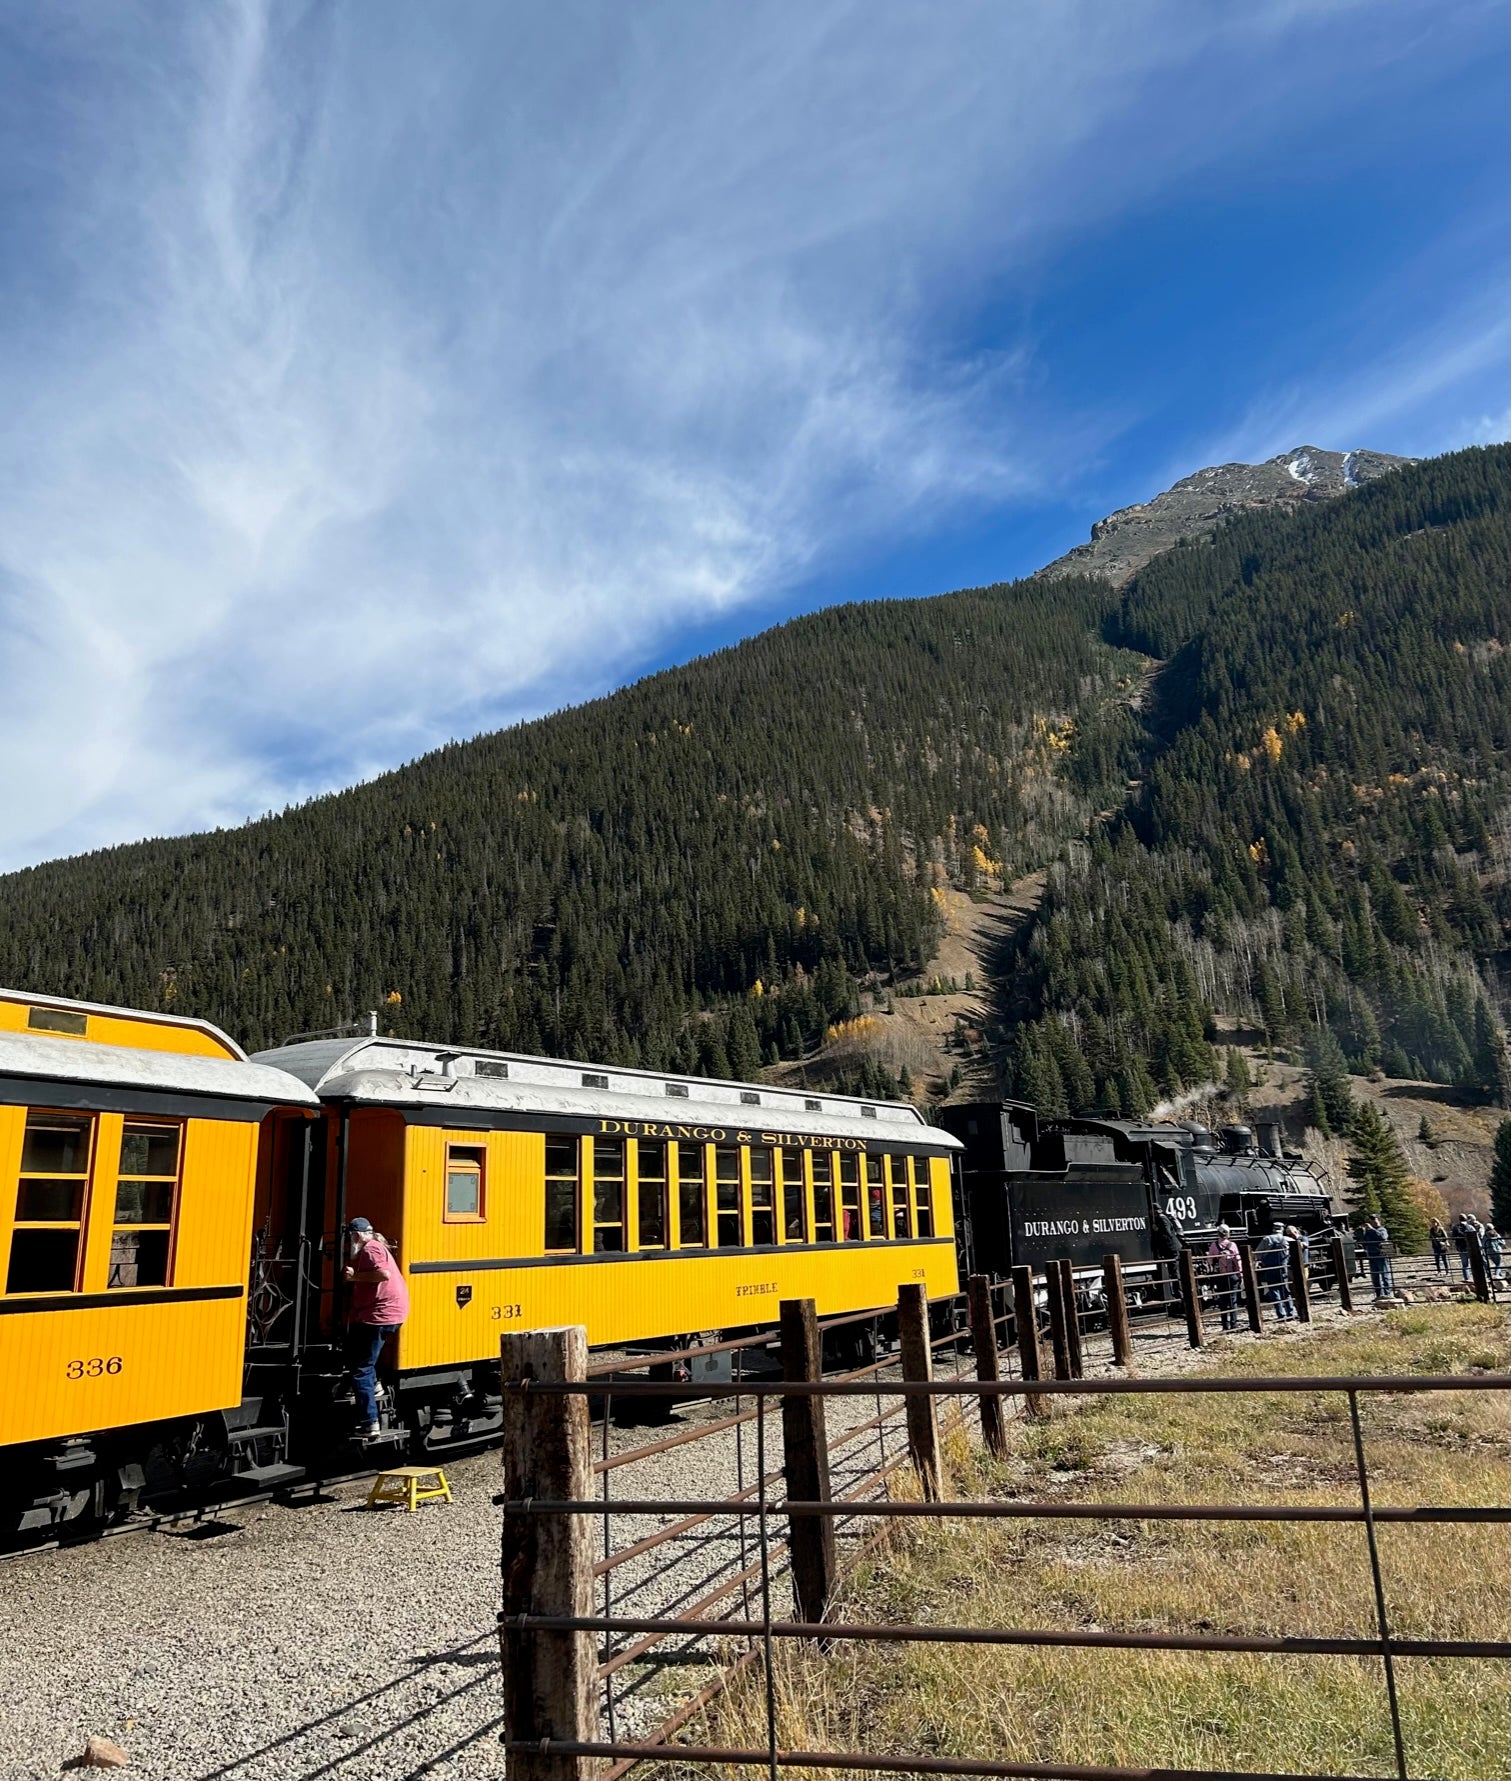 The steam engine pulls right into the centre of Silverton on its scenic daily trips from Durango past breathtaking vistas – but this is the first known that ‘Bigfoot’ was spotted, too